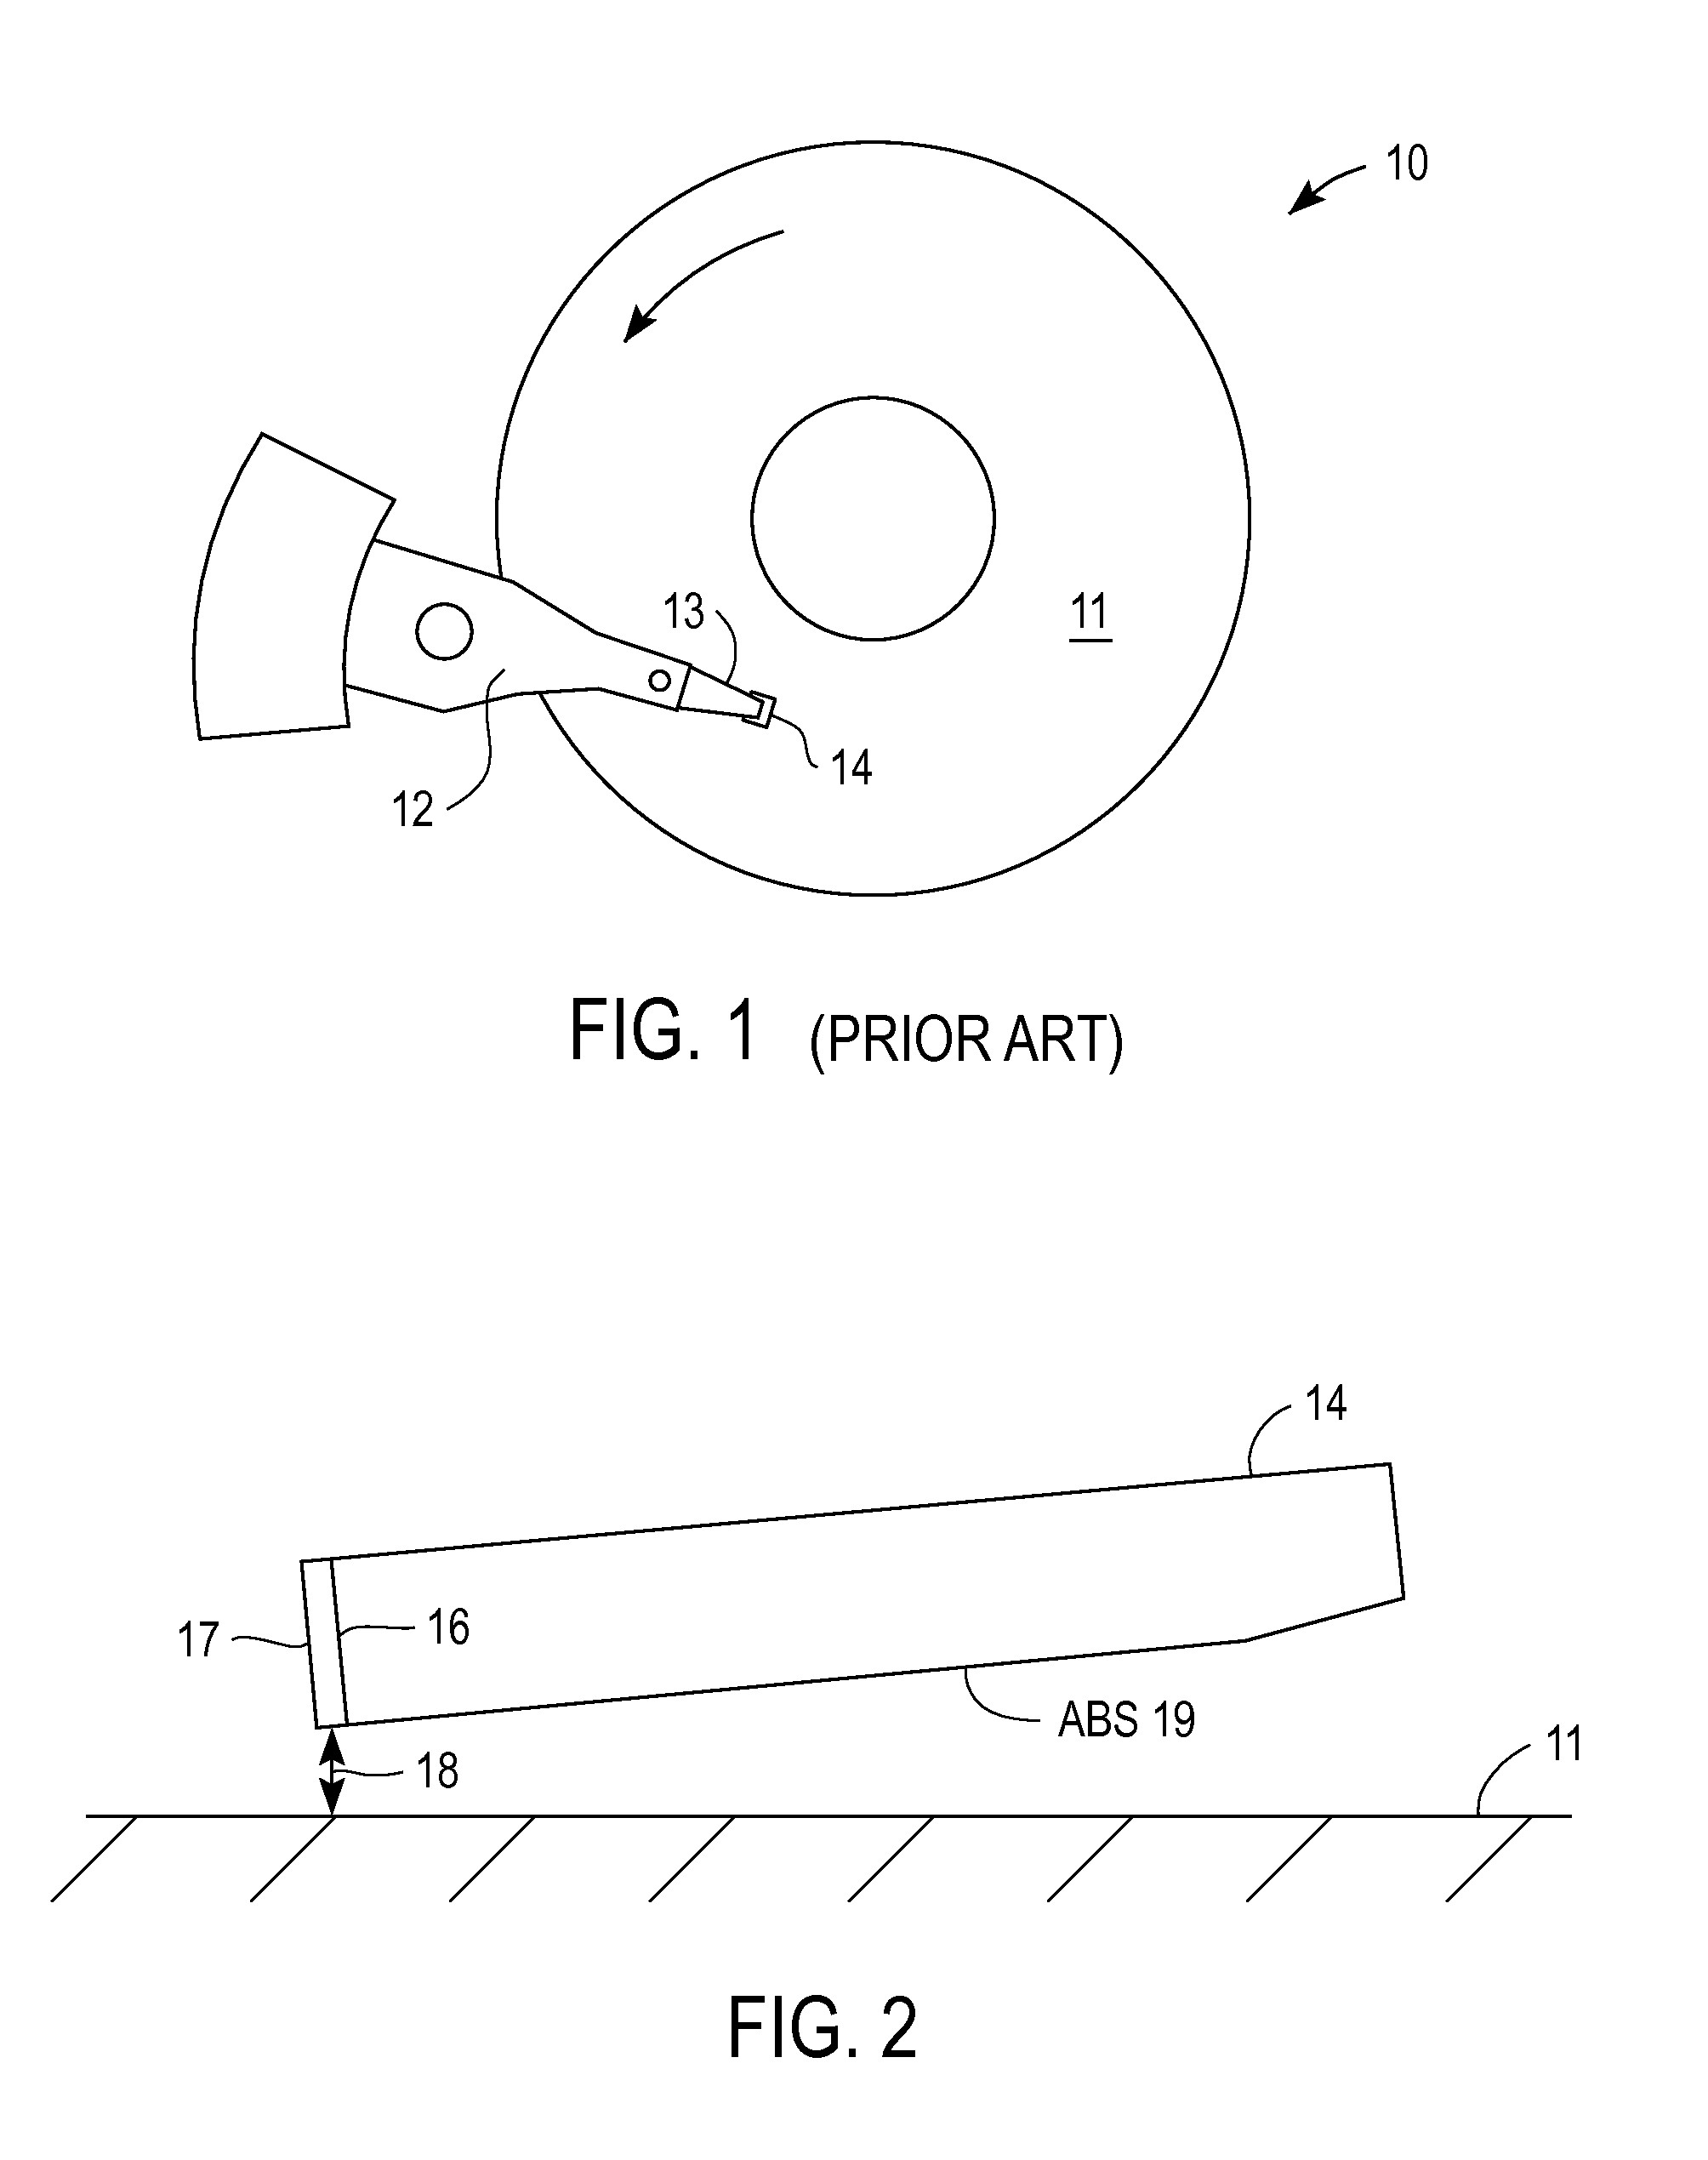 Perpendicular magnetic recording head with dynamic flying height heating element disposed below turns of a write coil